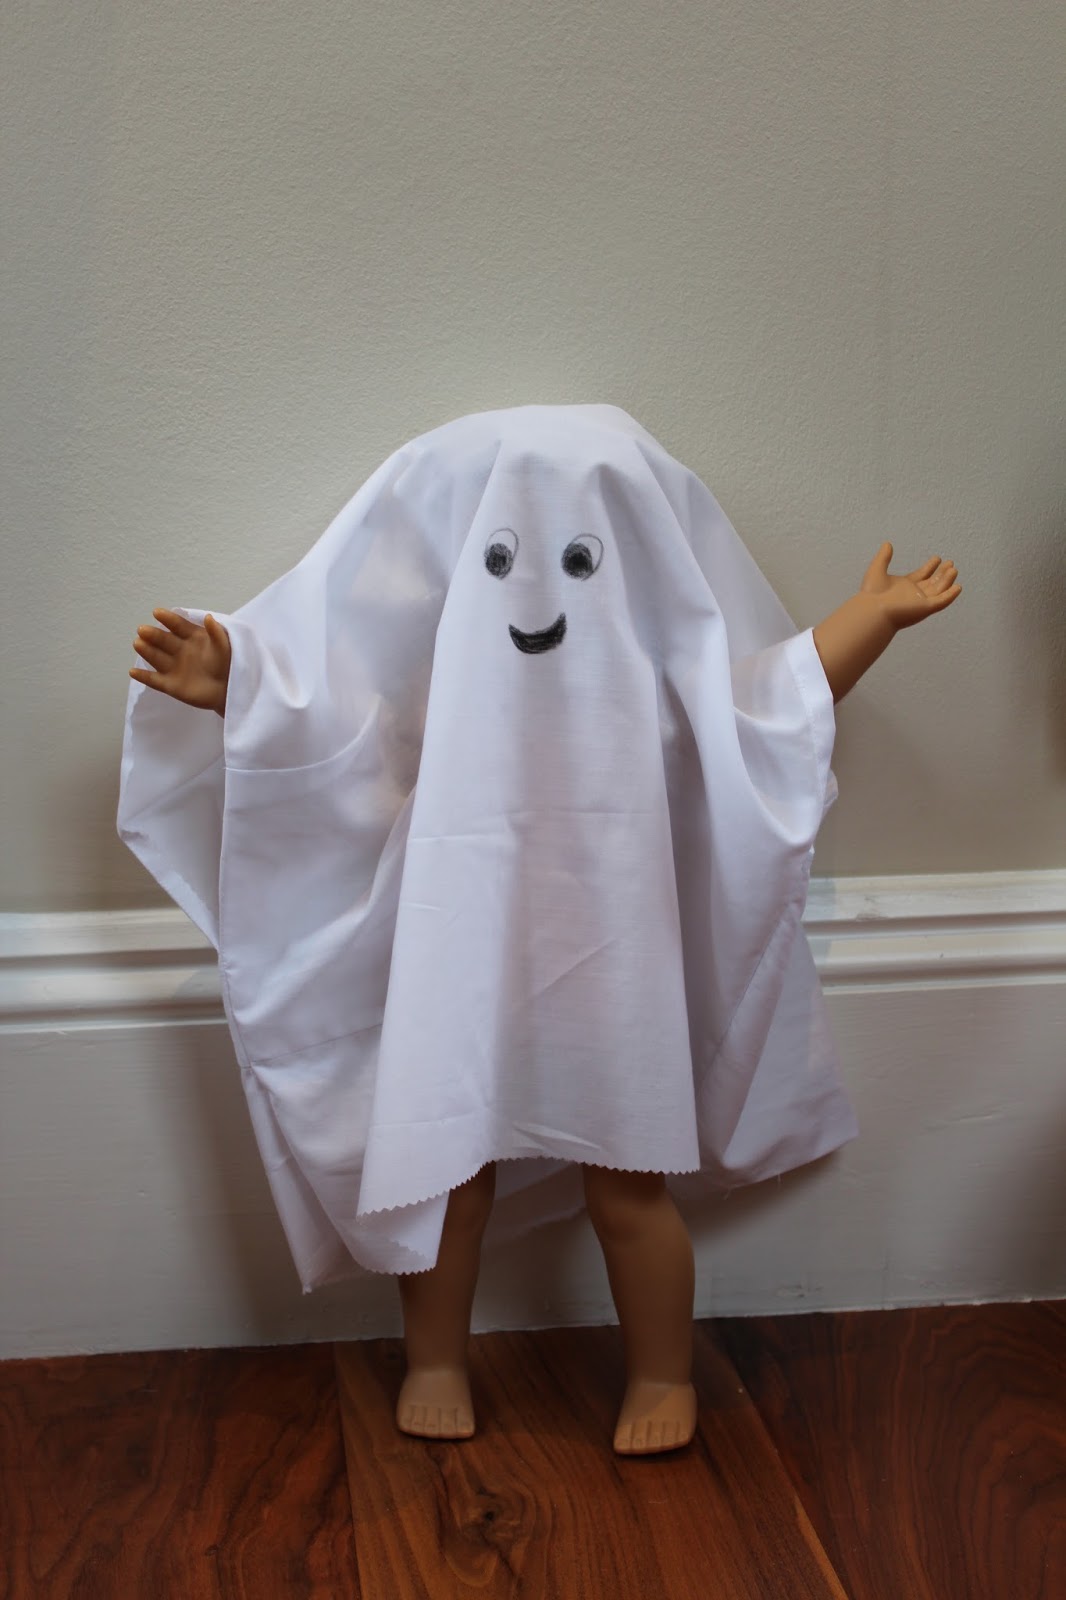 Cathy makes...: Doll Ghost Costume